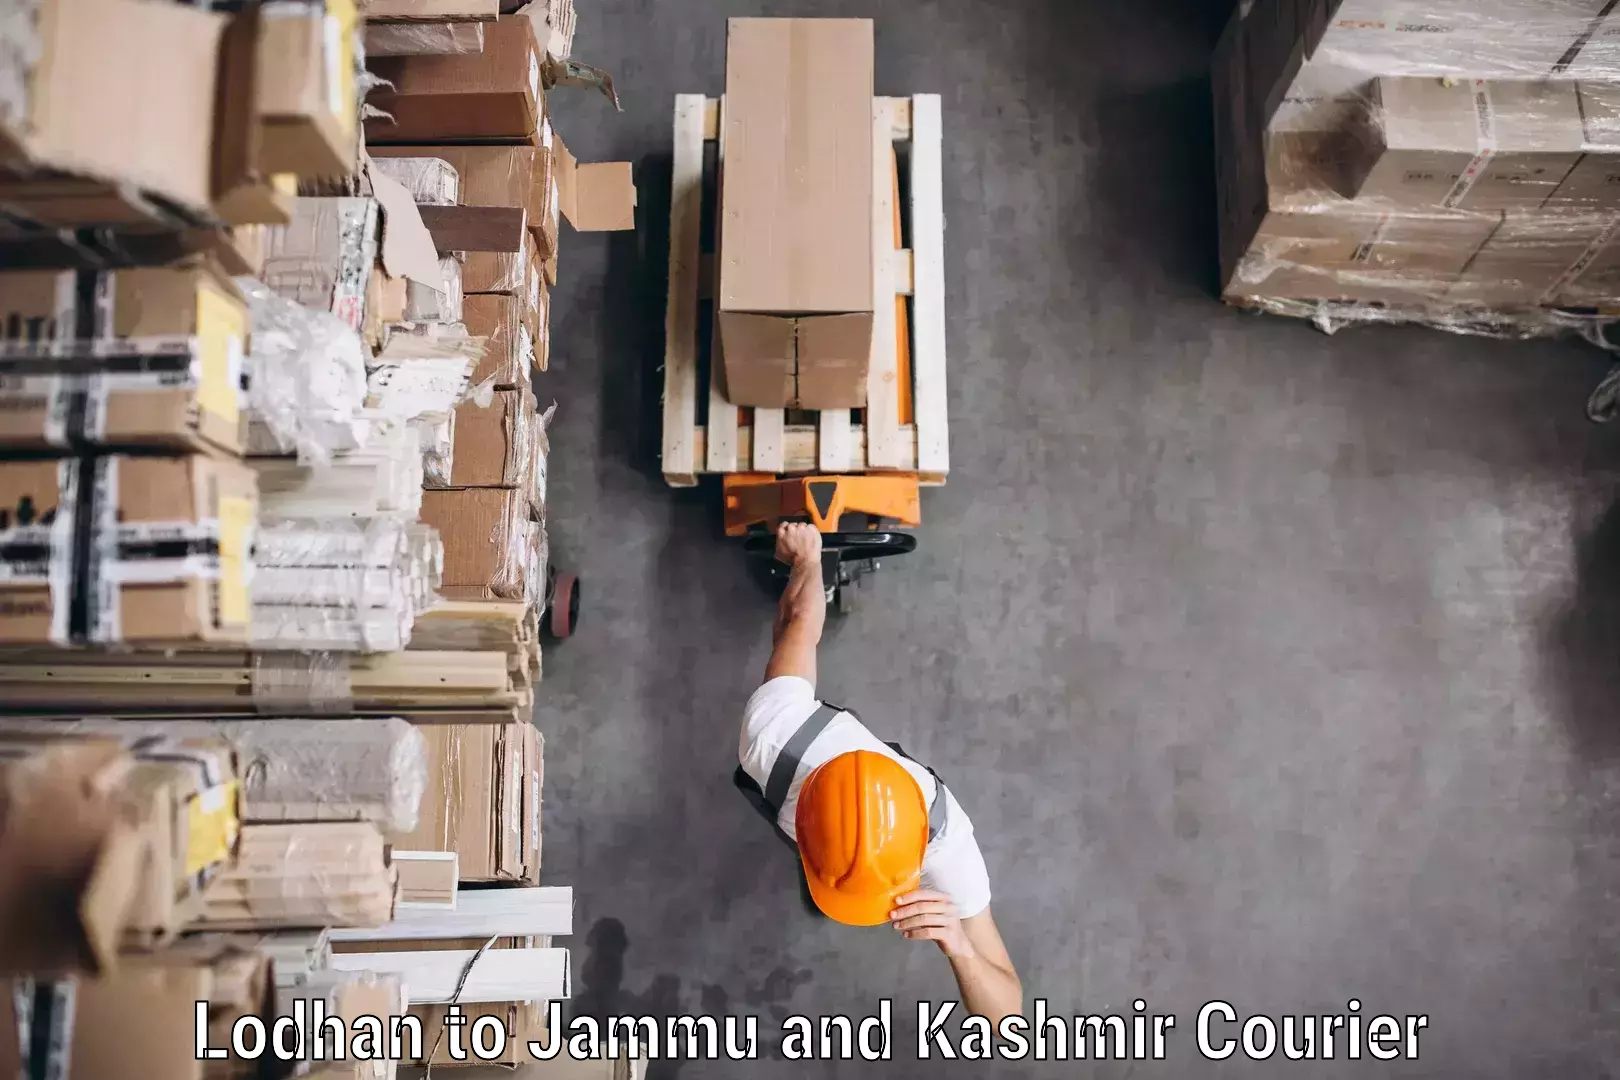 Specialized courier services in Lodhan to Jammu and Kashmir